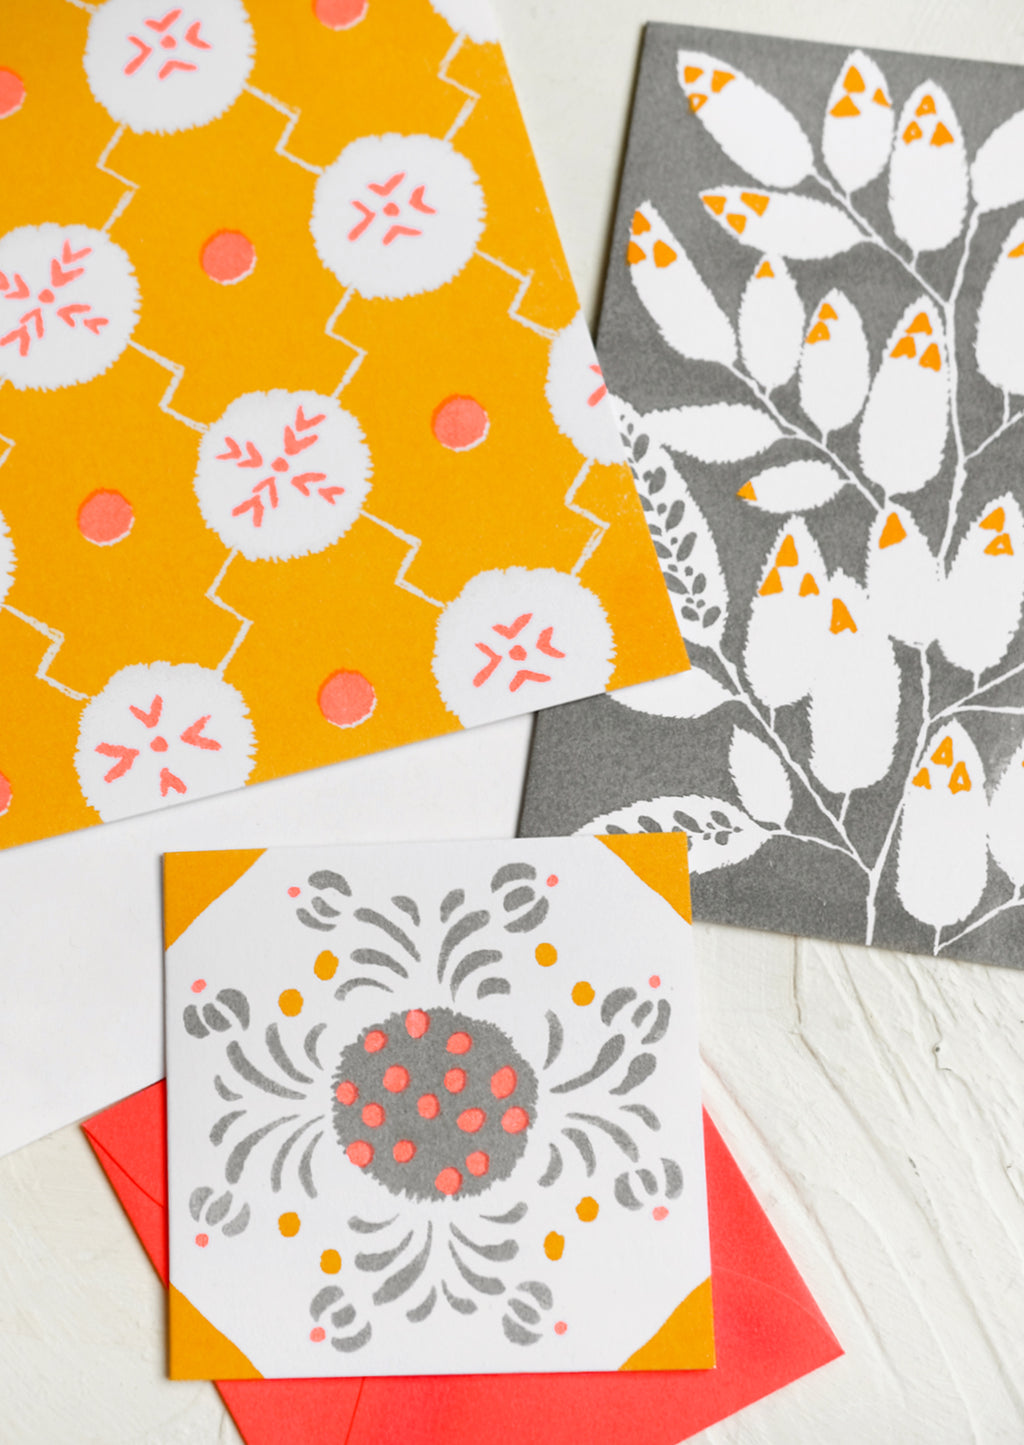 Grey / Marigold: A patterned risograph printed card set in grey, coral and orange.